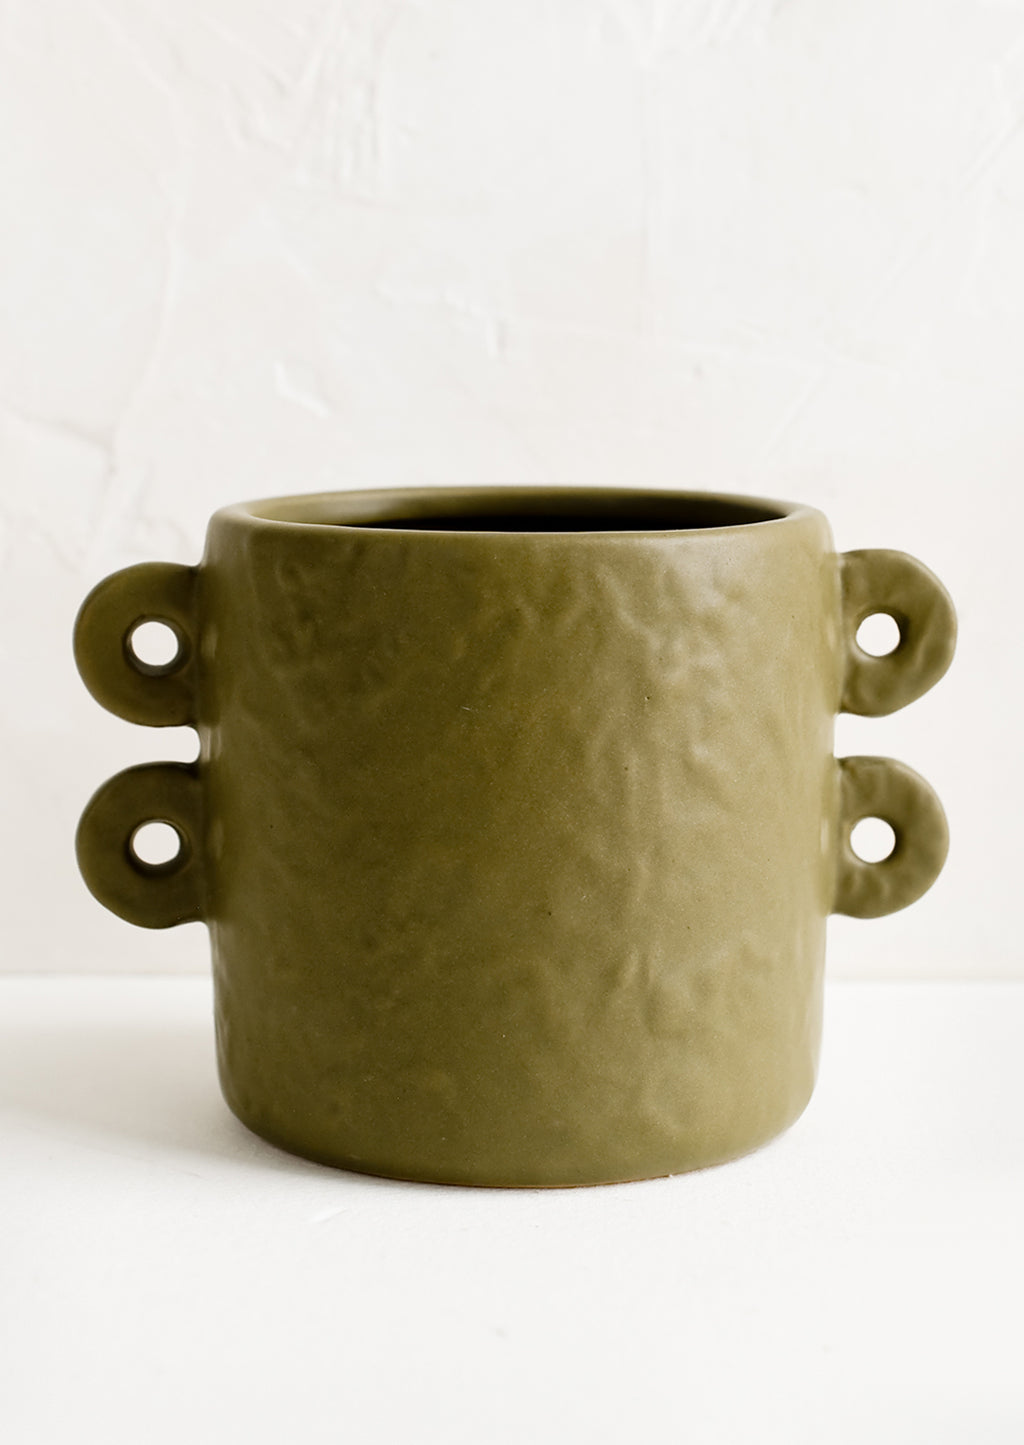 1: An army green round planter with decorative loop handles at sides.